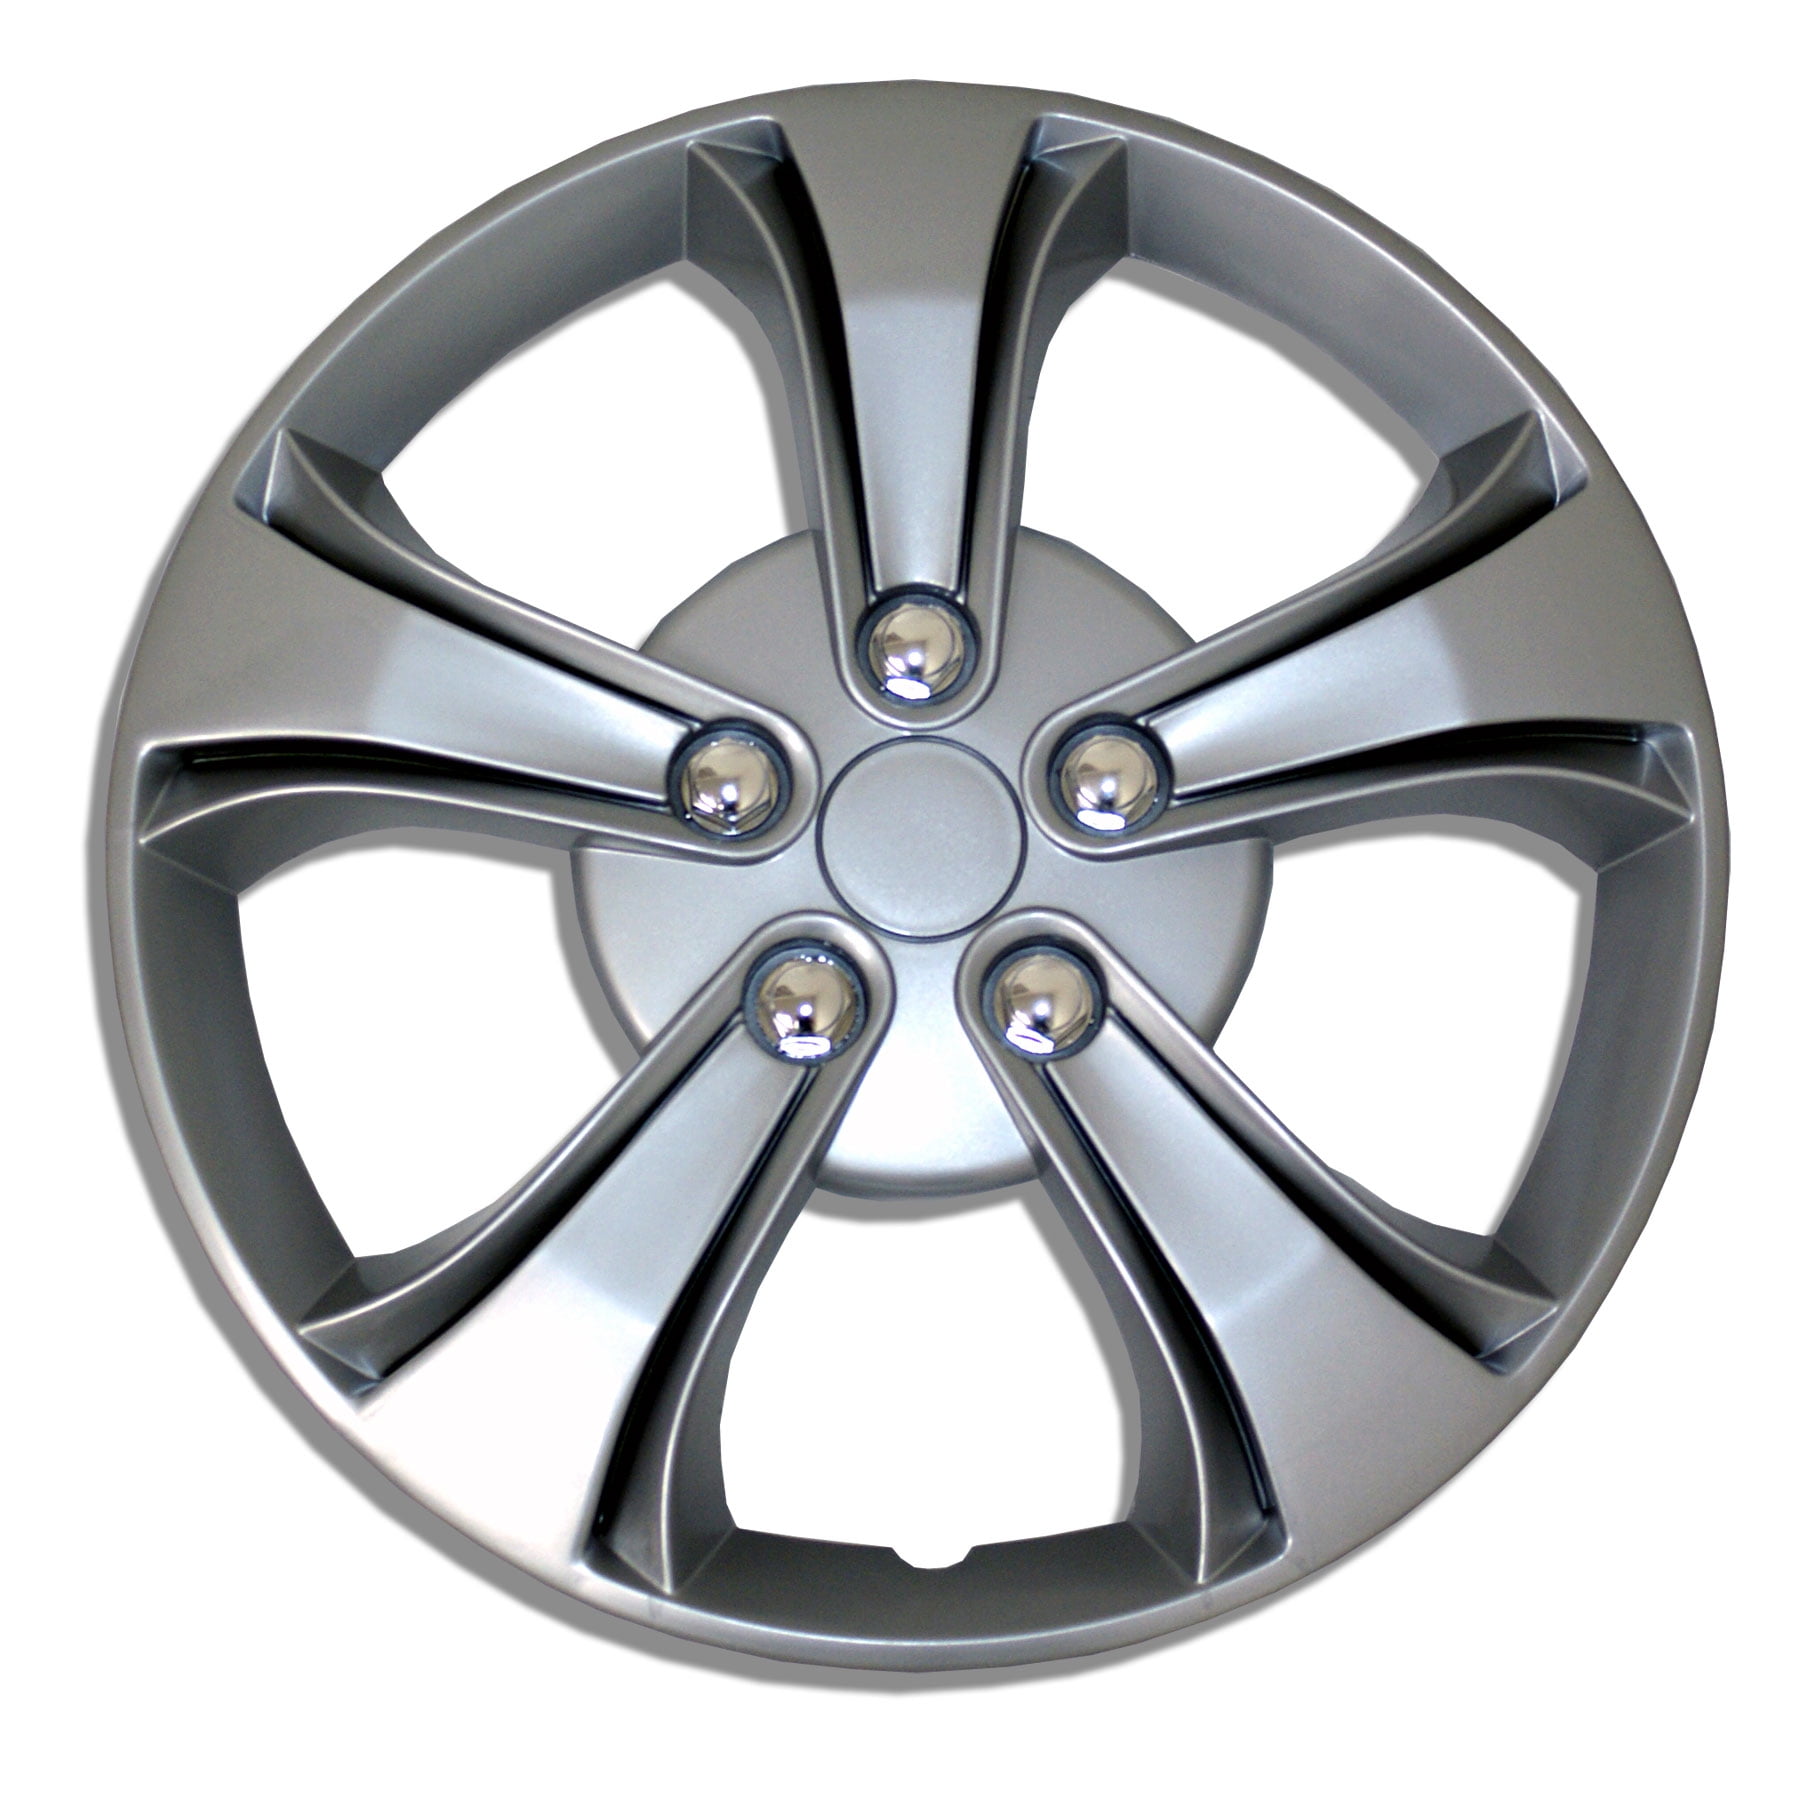 TuningPros WSC-616S14 Hubcaps Wheel Skin Cover 14-Inches Silver Set of 4 